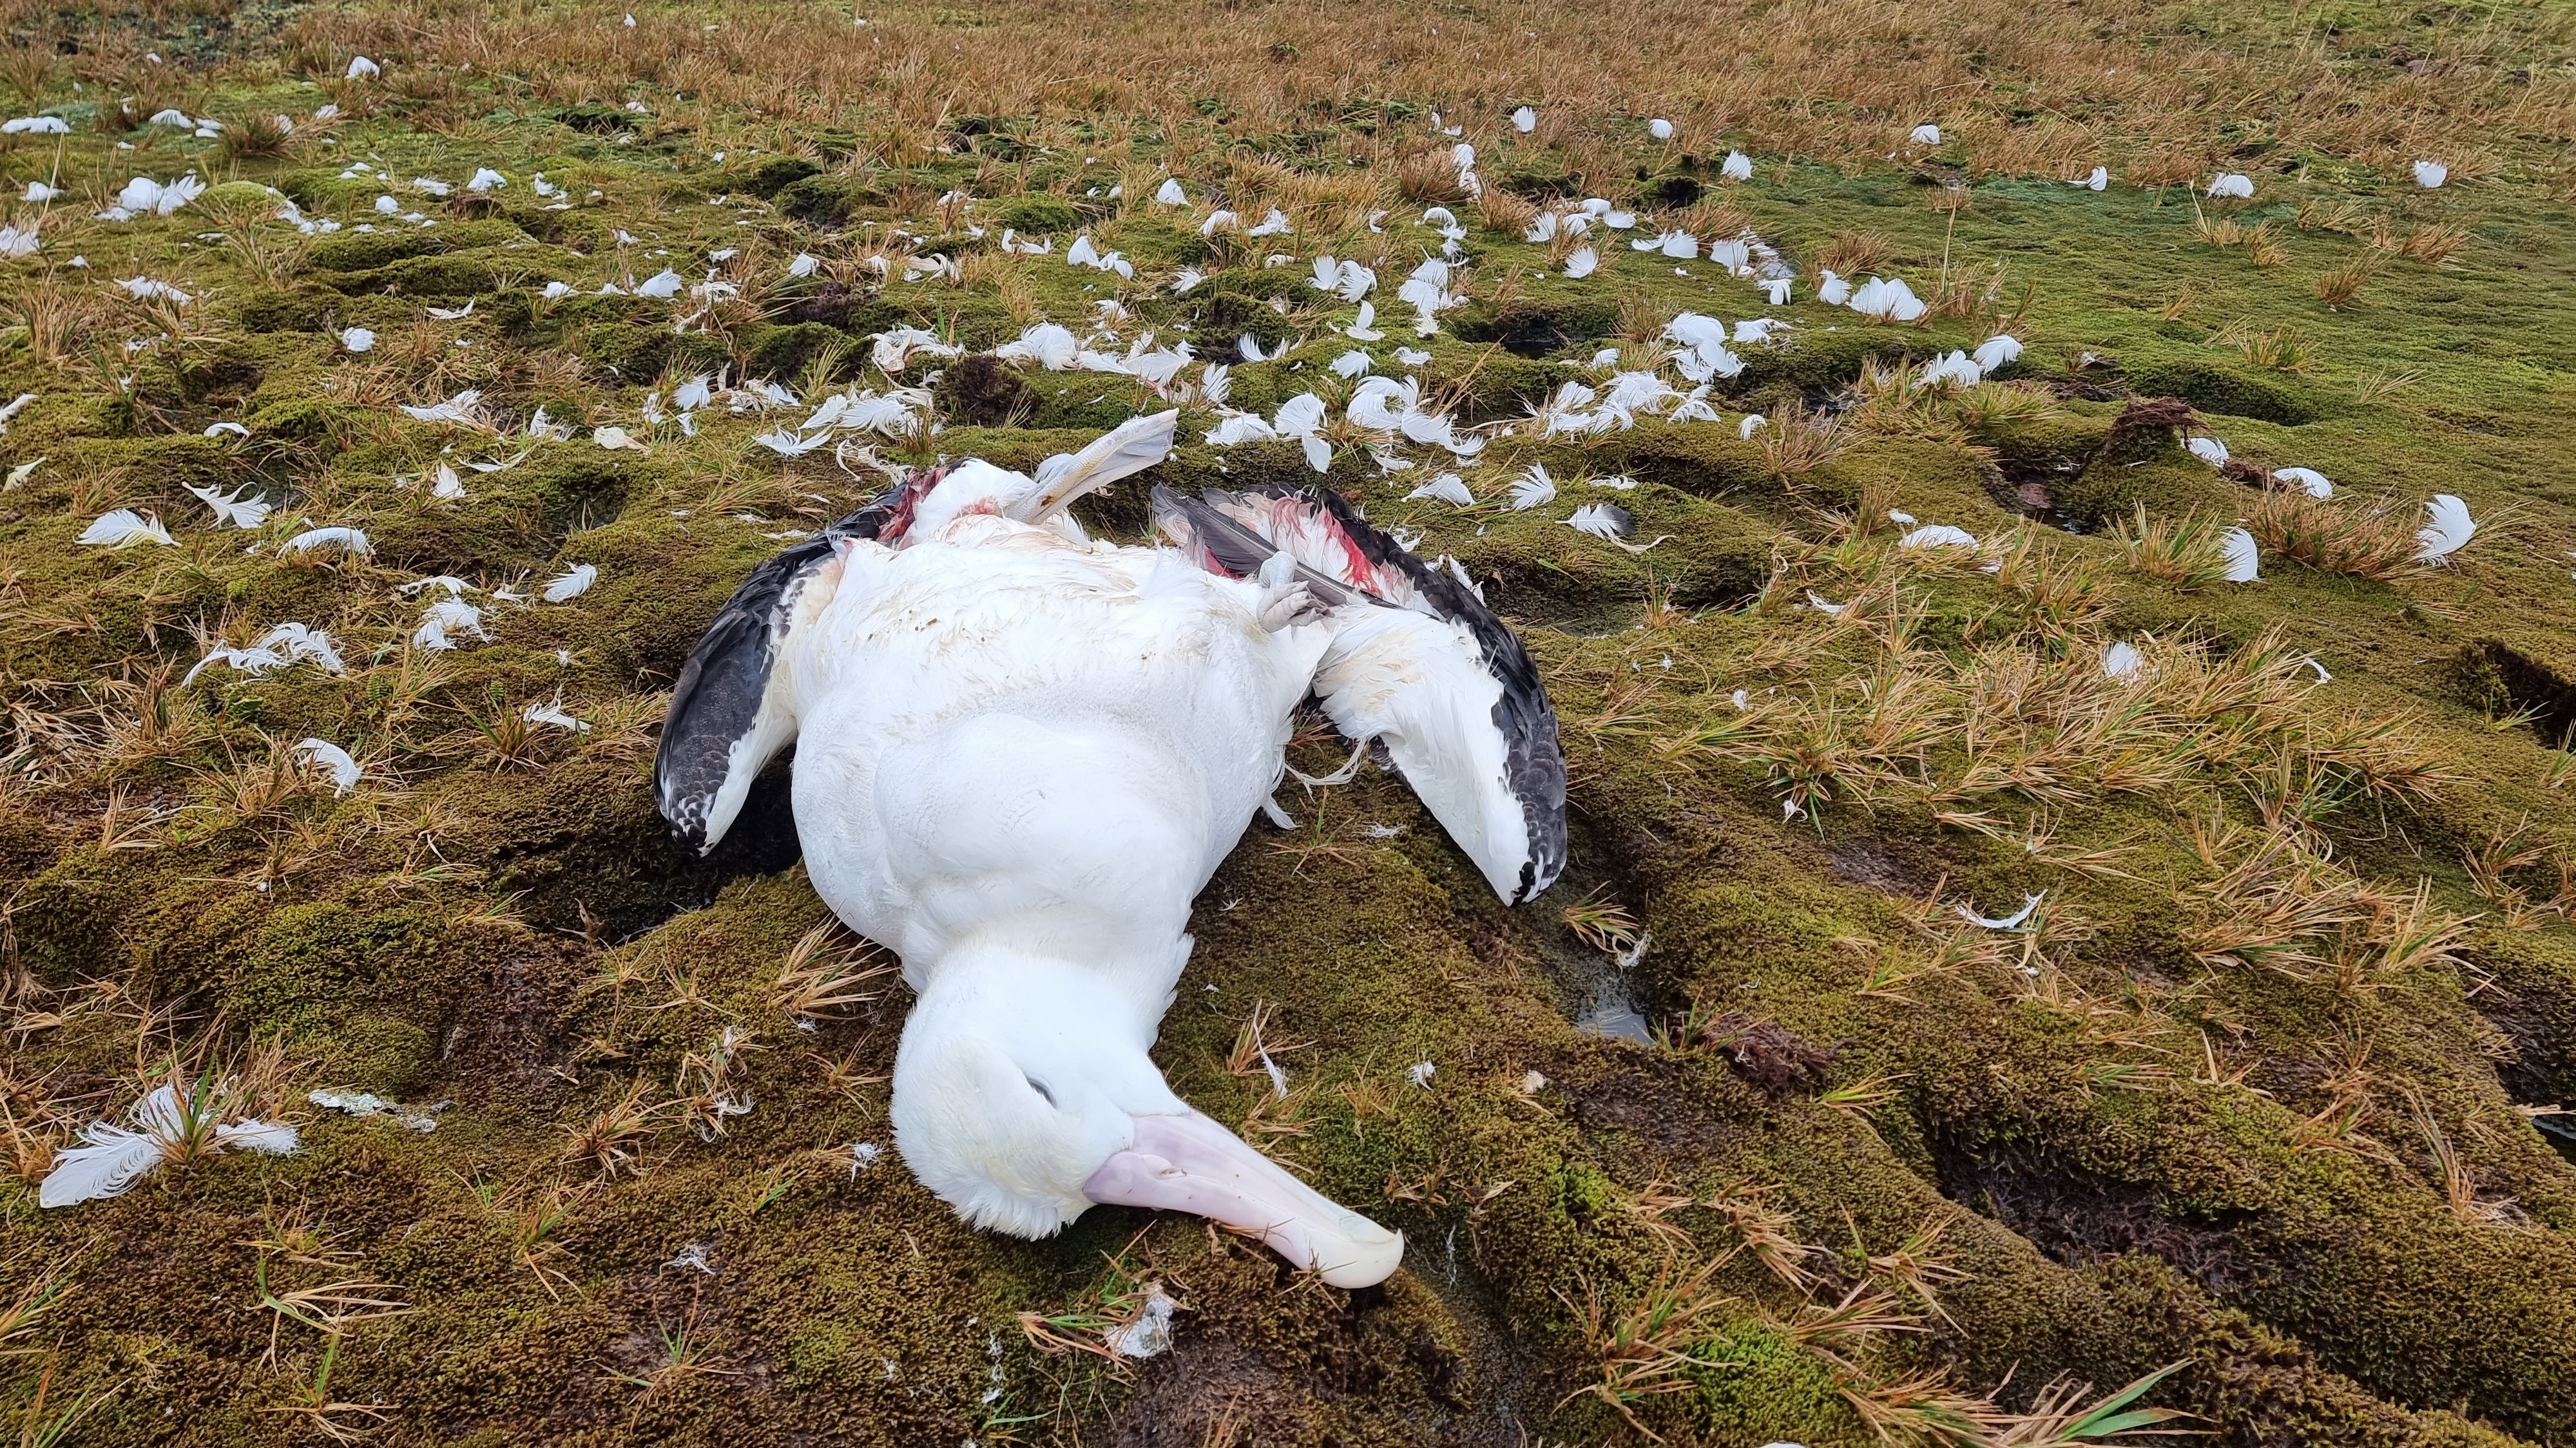 a dead albatross on a grassy field with feathers strewn behind it